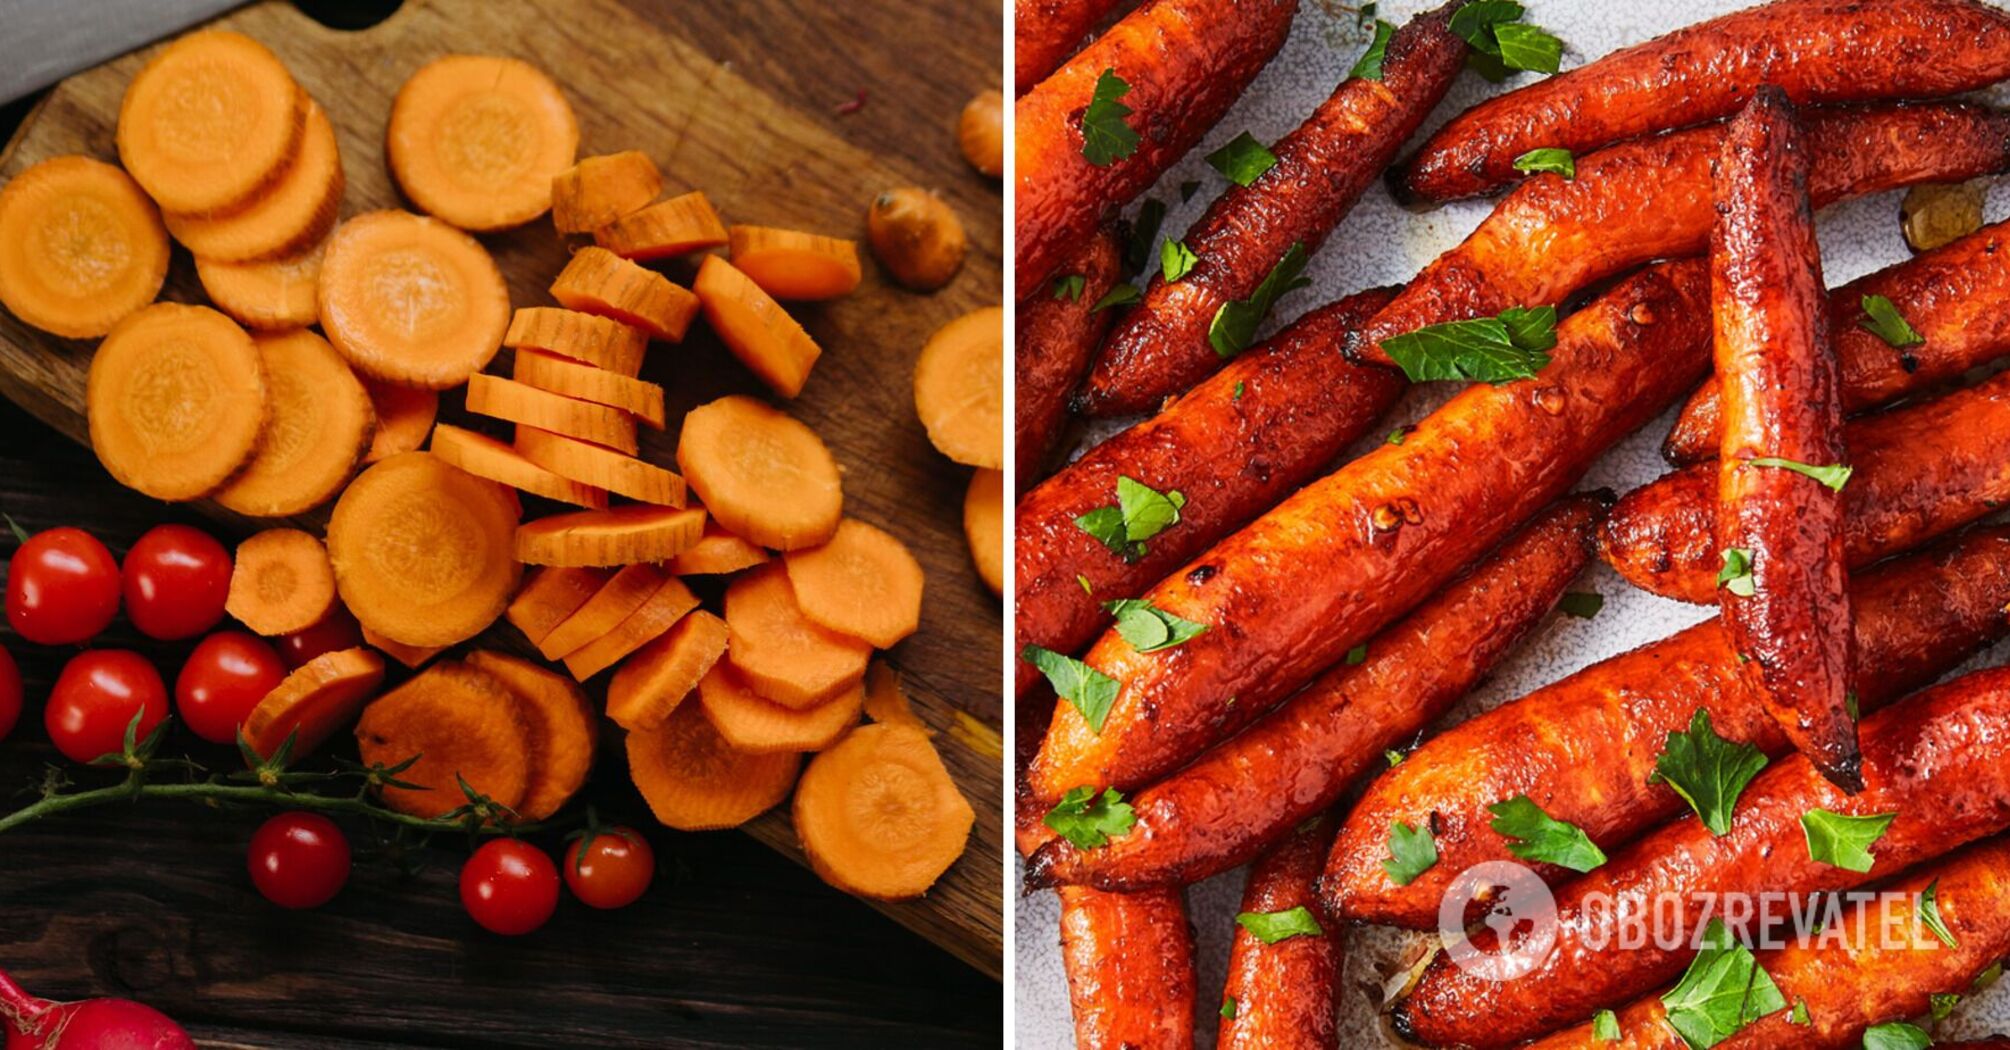 A delicious carrot side dish